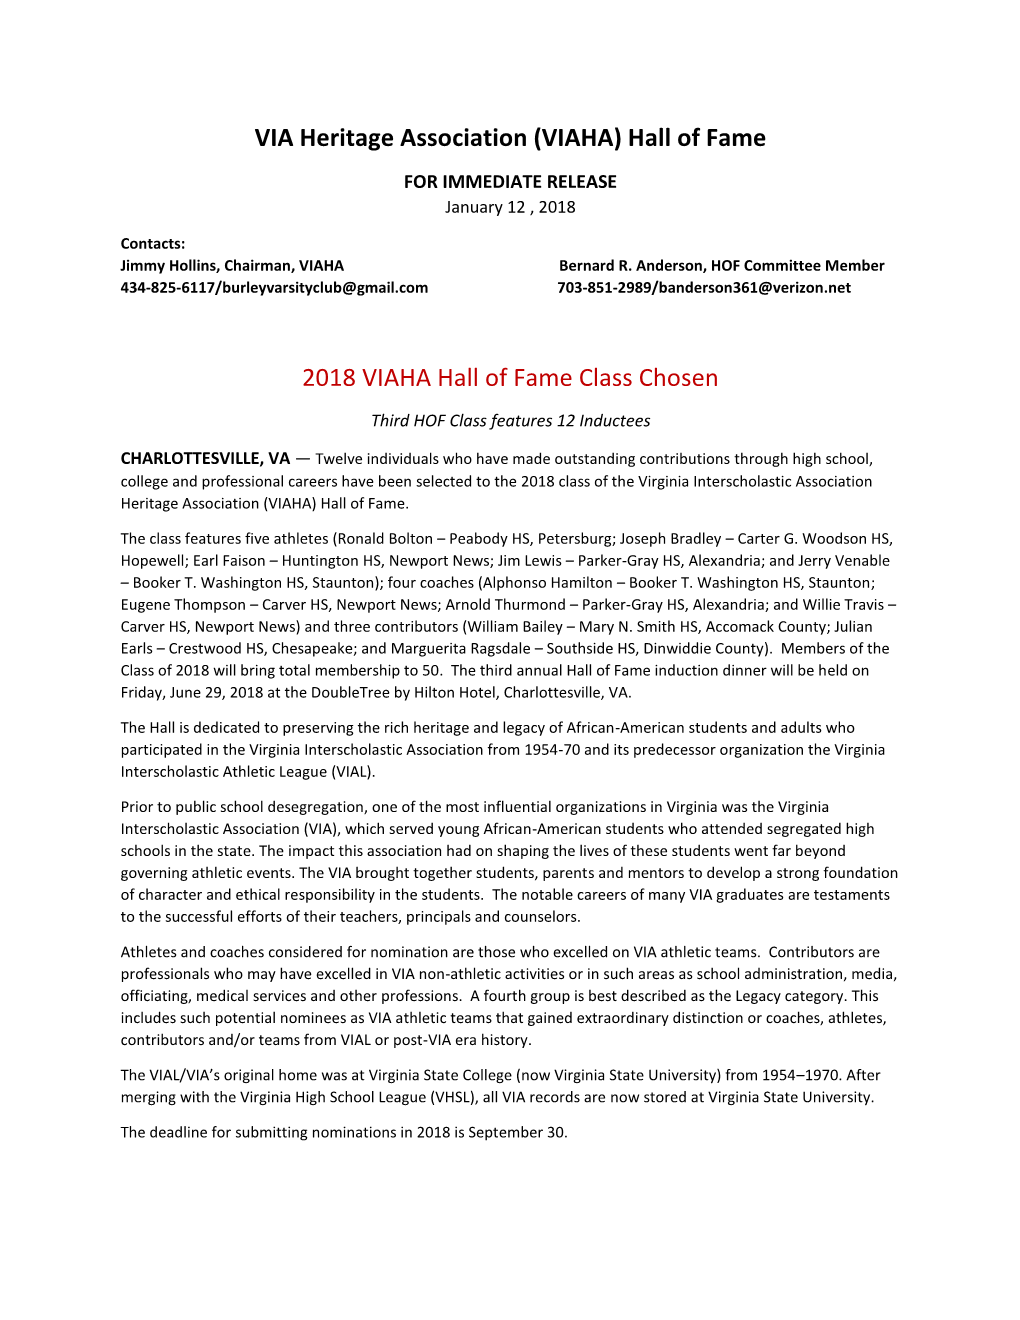 VIAHA) Hall of Fame for IMMEDIATE RELEASE January 12 , 2018